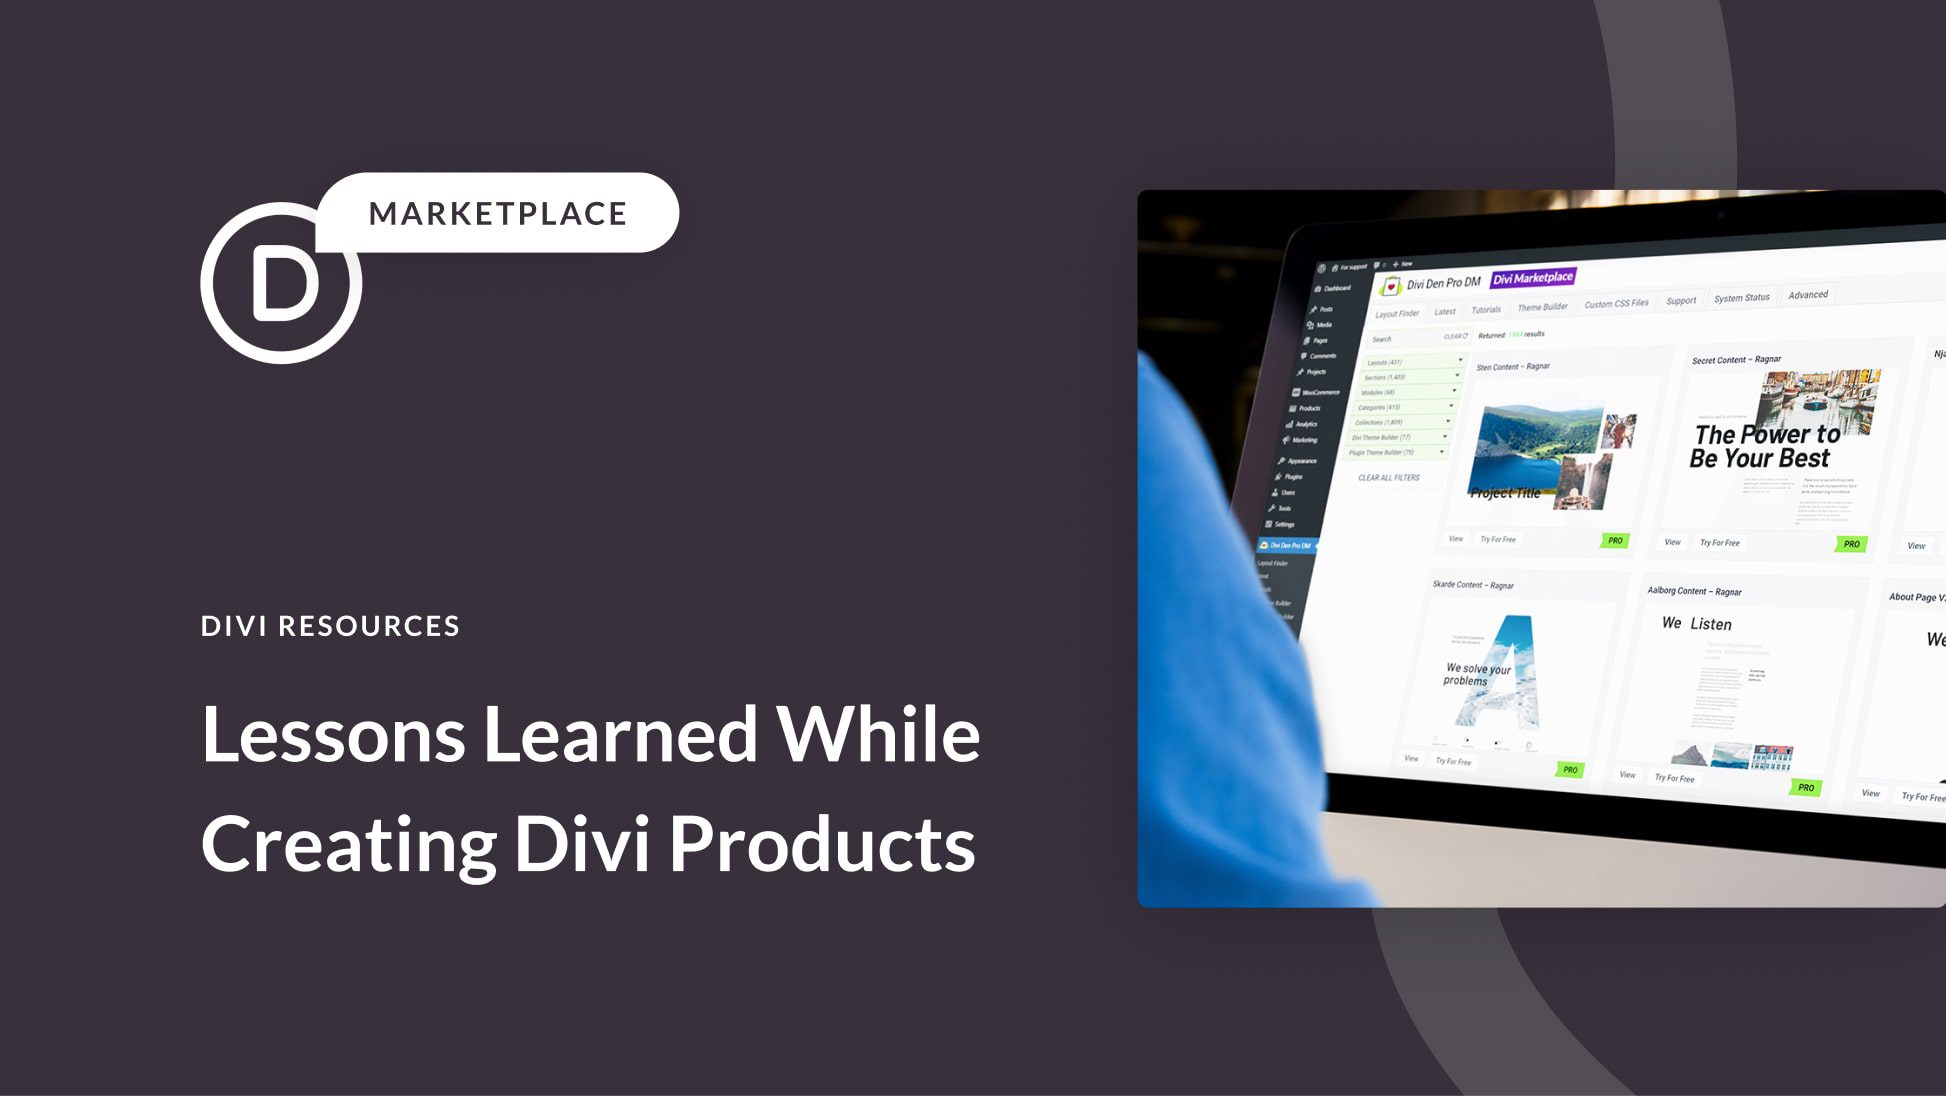 Lessons Learned While Creating Products for Divi